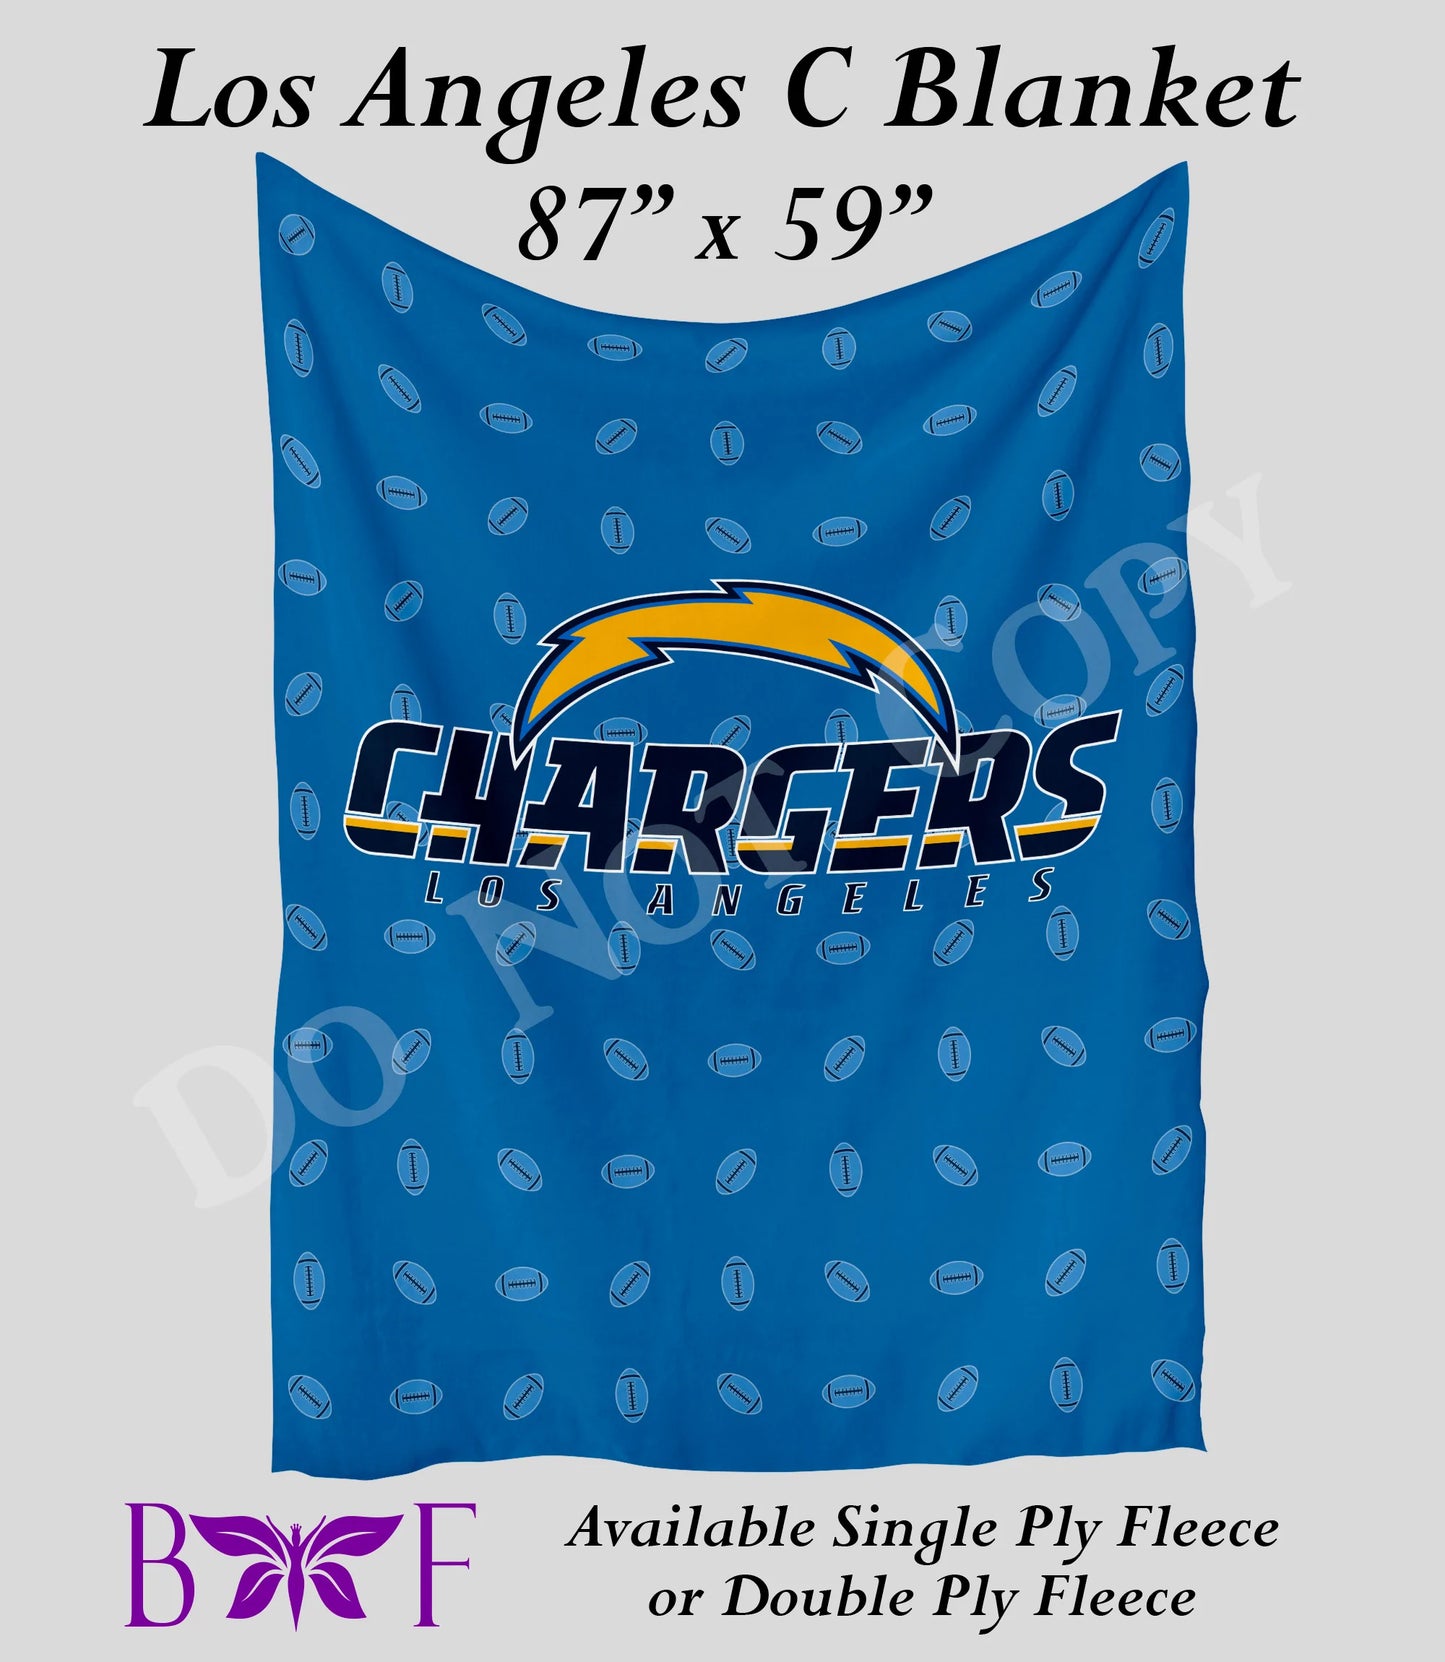 Los Angeles C 59"x87" soft blanket also available with sherpa fleece